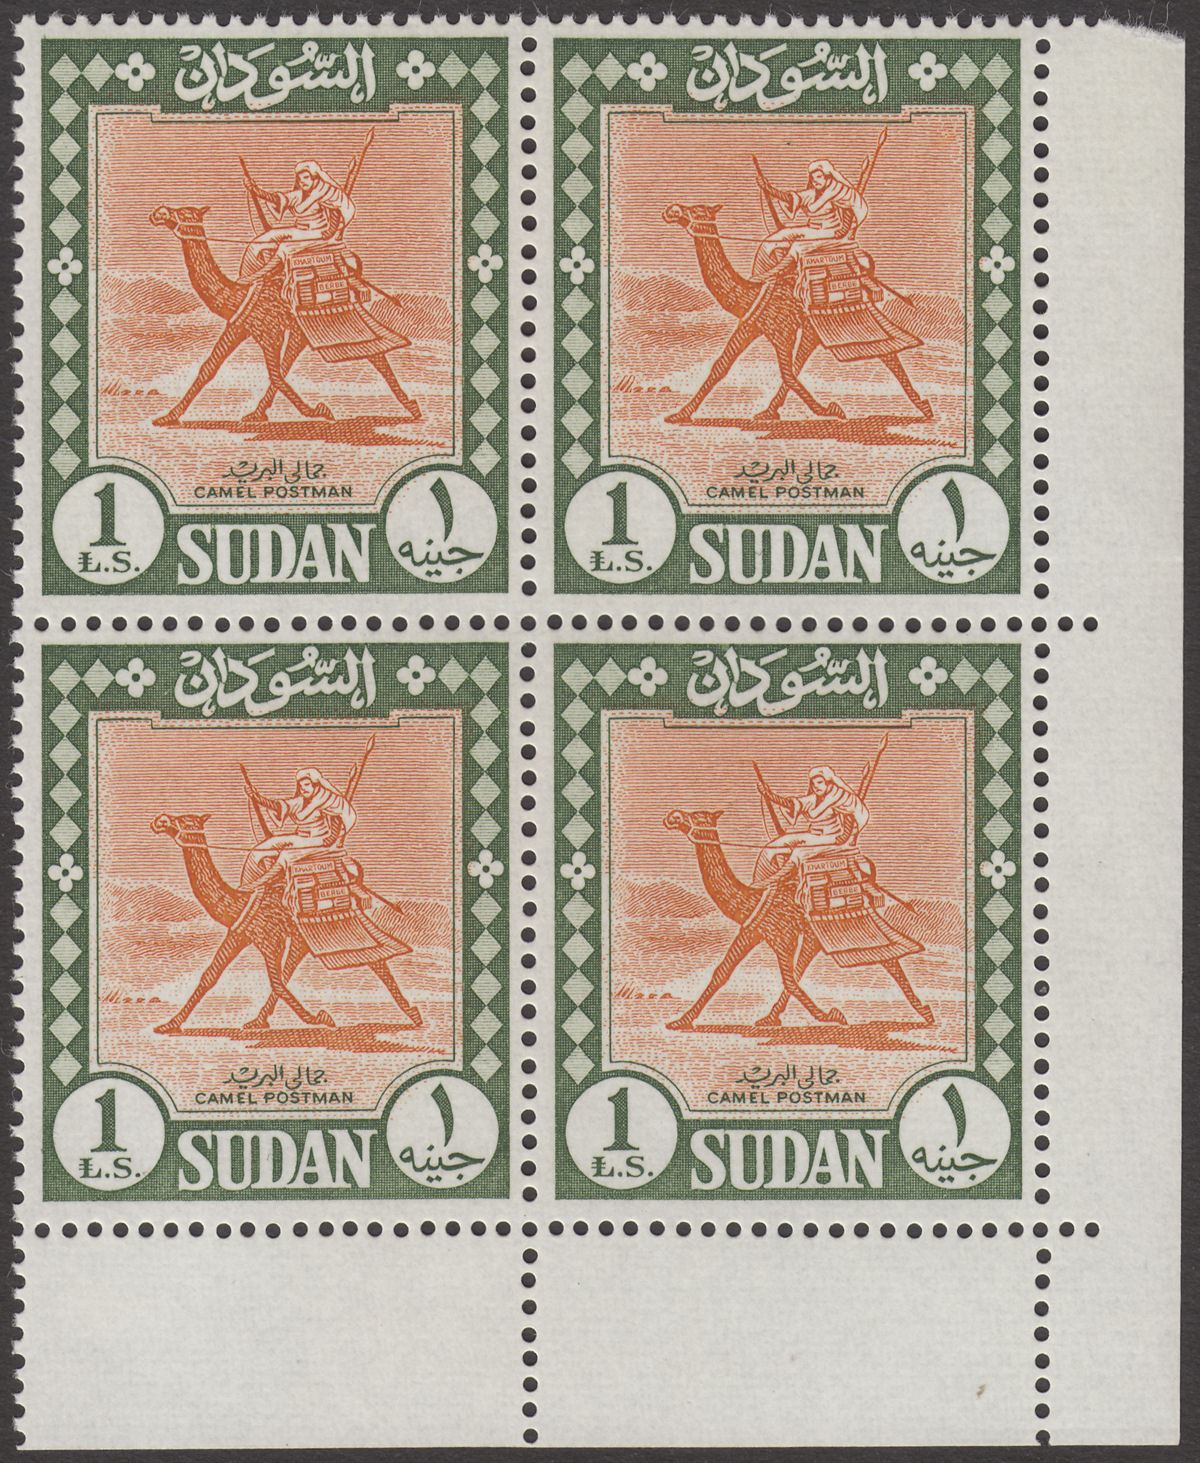 Sudan 1975?? KGV Unwatermarked Camel Postman £S1 Block Mint SG Unlisted 